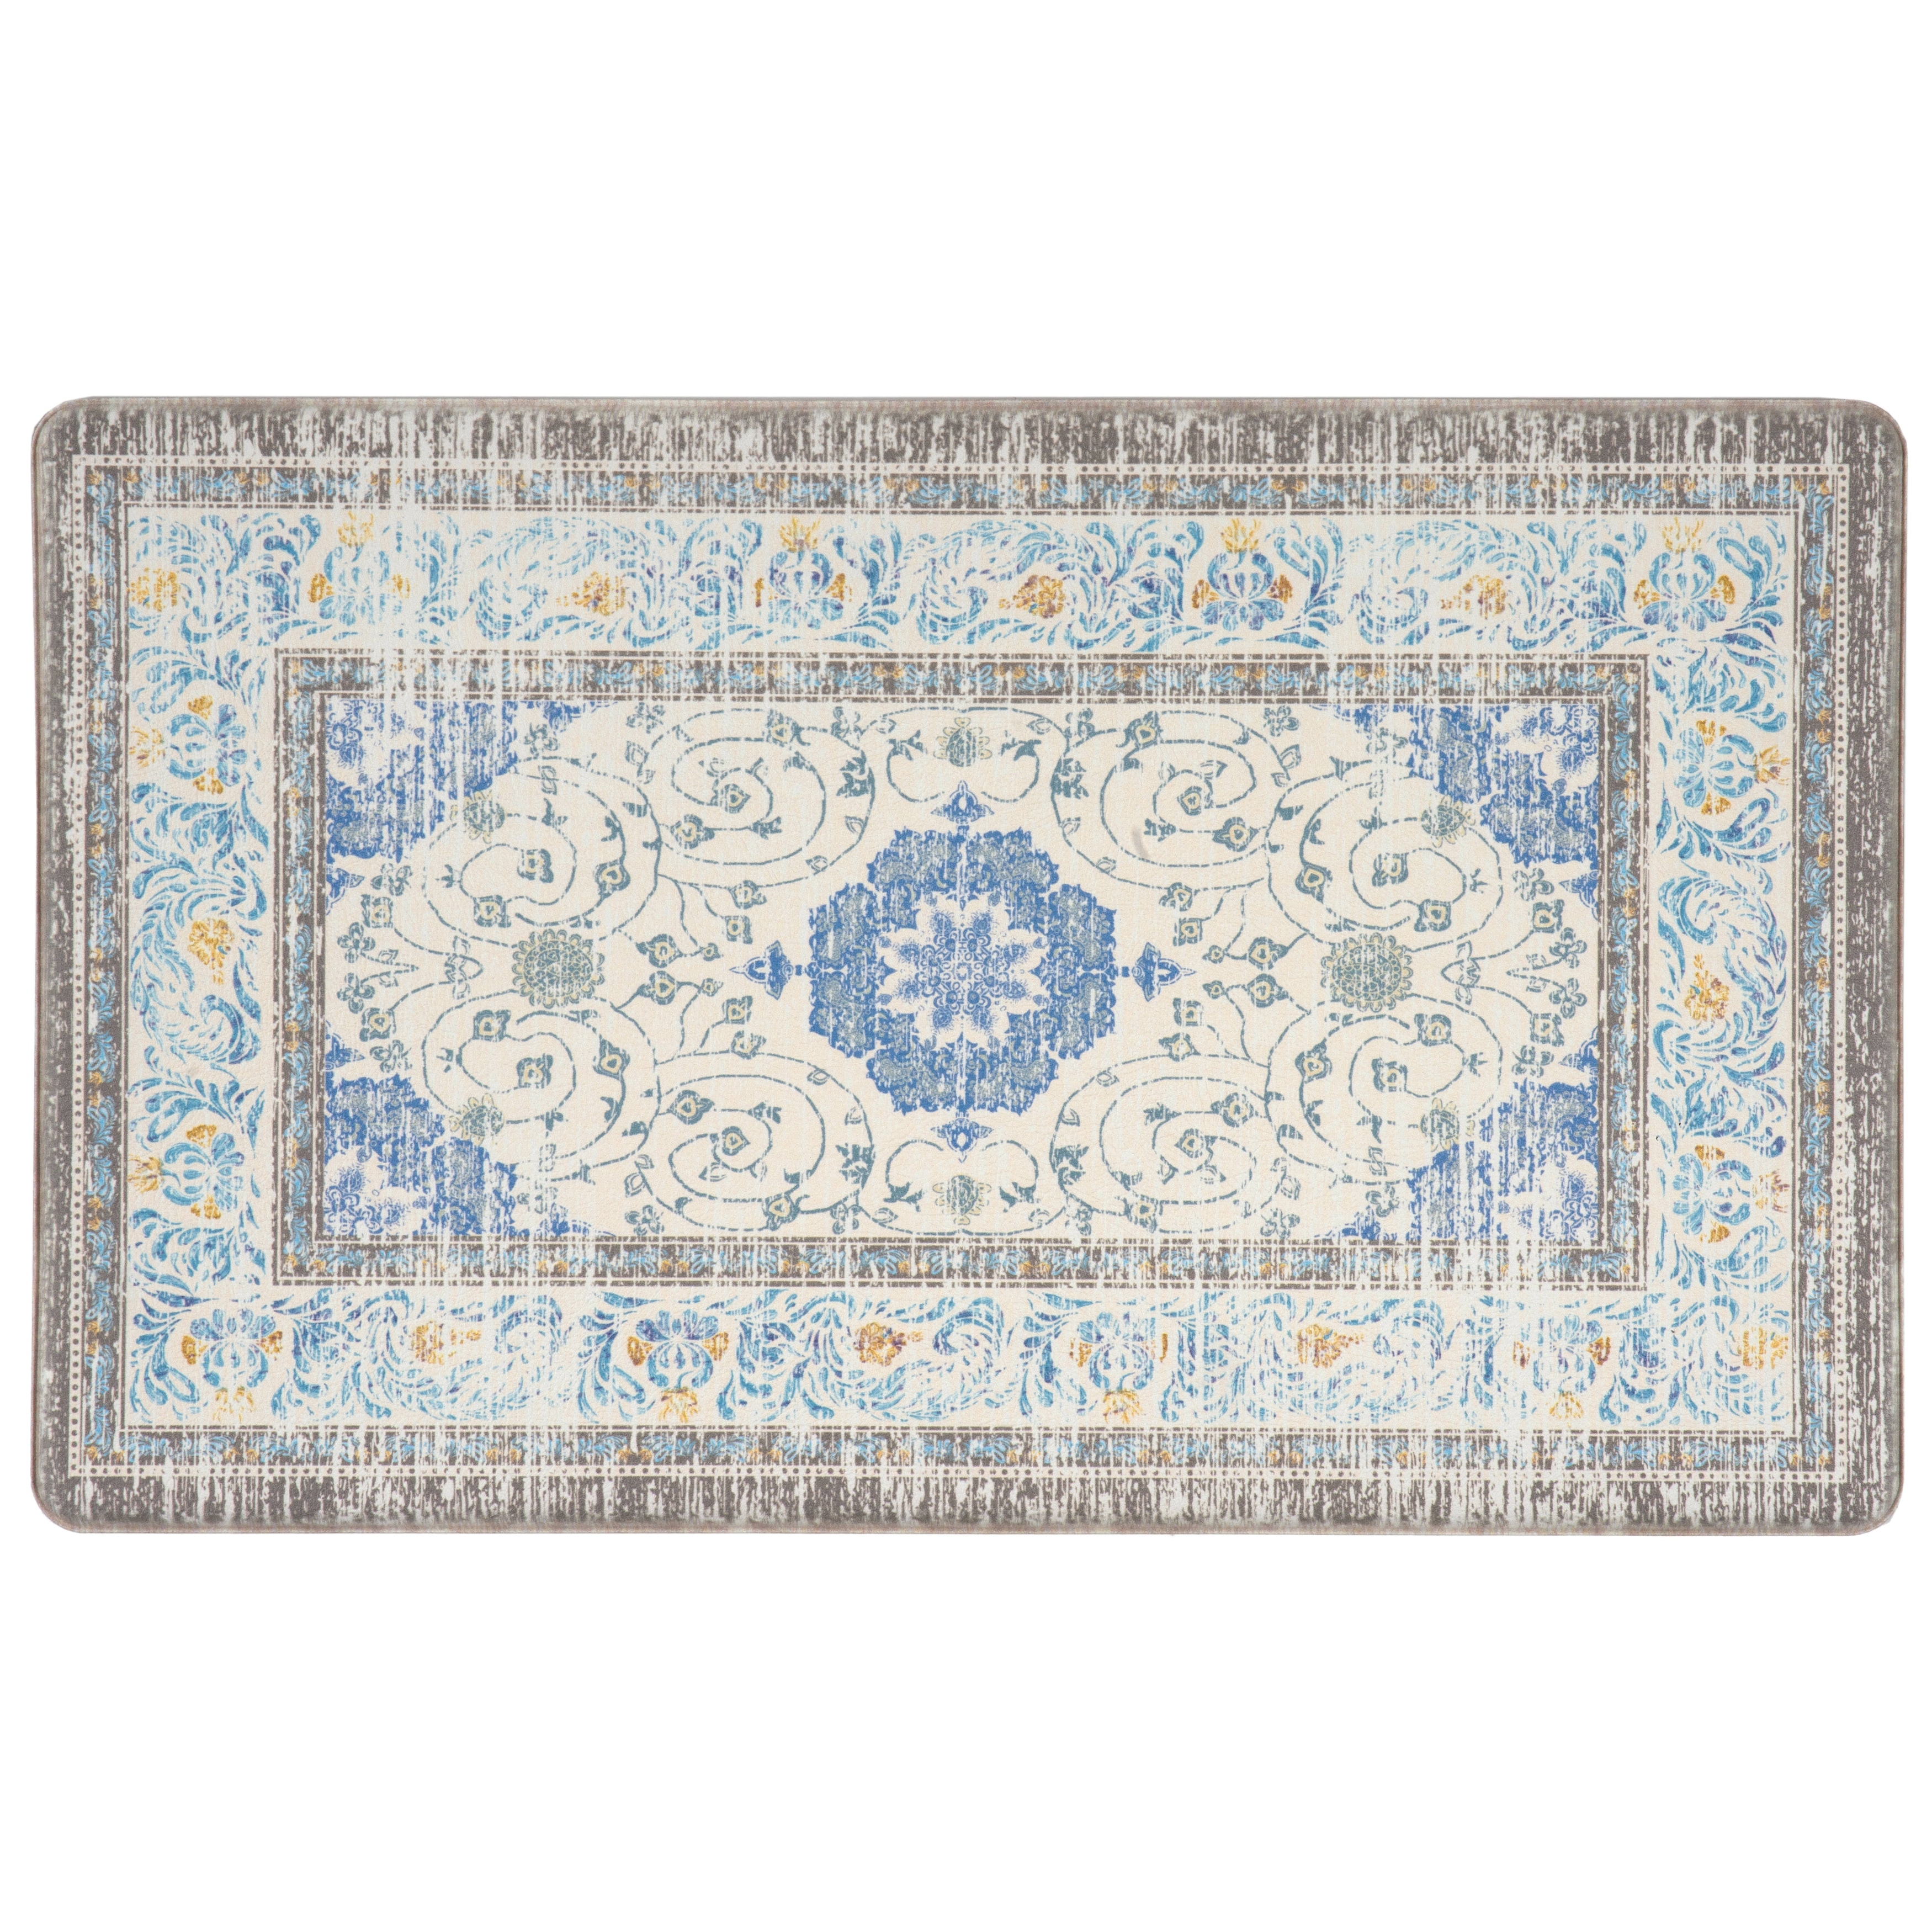 https://ak1.ostkcdn.com/images/products/is/images/direct/8879543c66f97274e08ee5078e8441ebabe4af02/Persian-Traditional-Anti-Fatigue-Standing-Mat.jpg